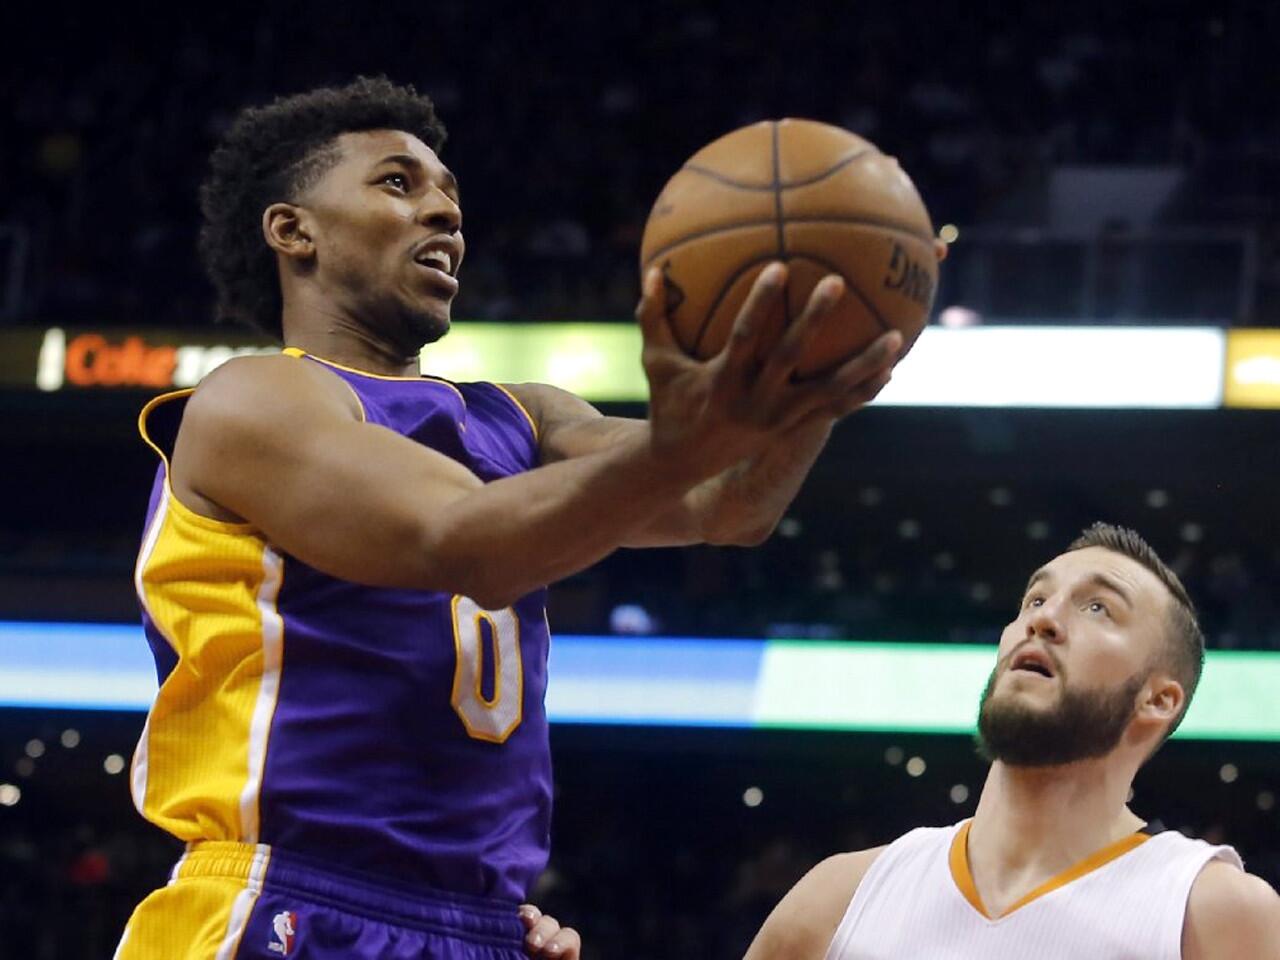 The Lakers' Nick Young drives past center Miles Plumlee of the Phoenix Suns during a recent game.